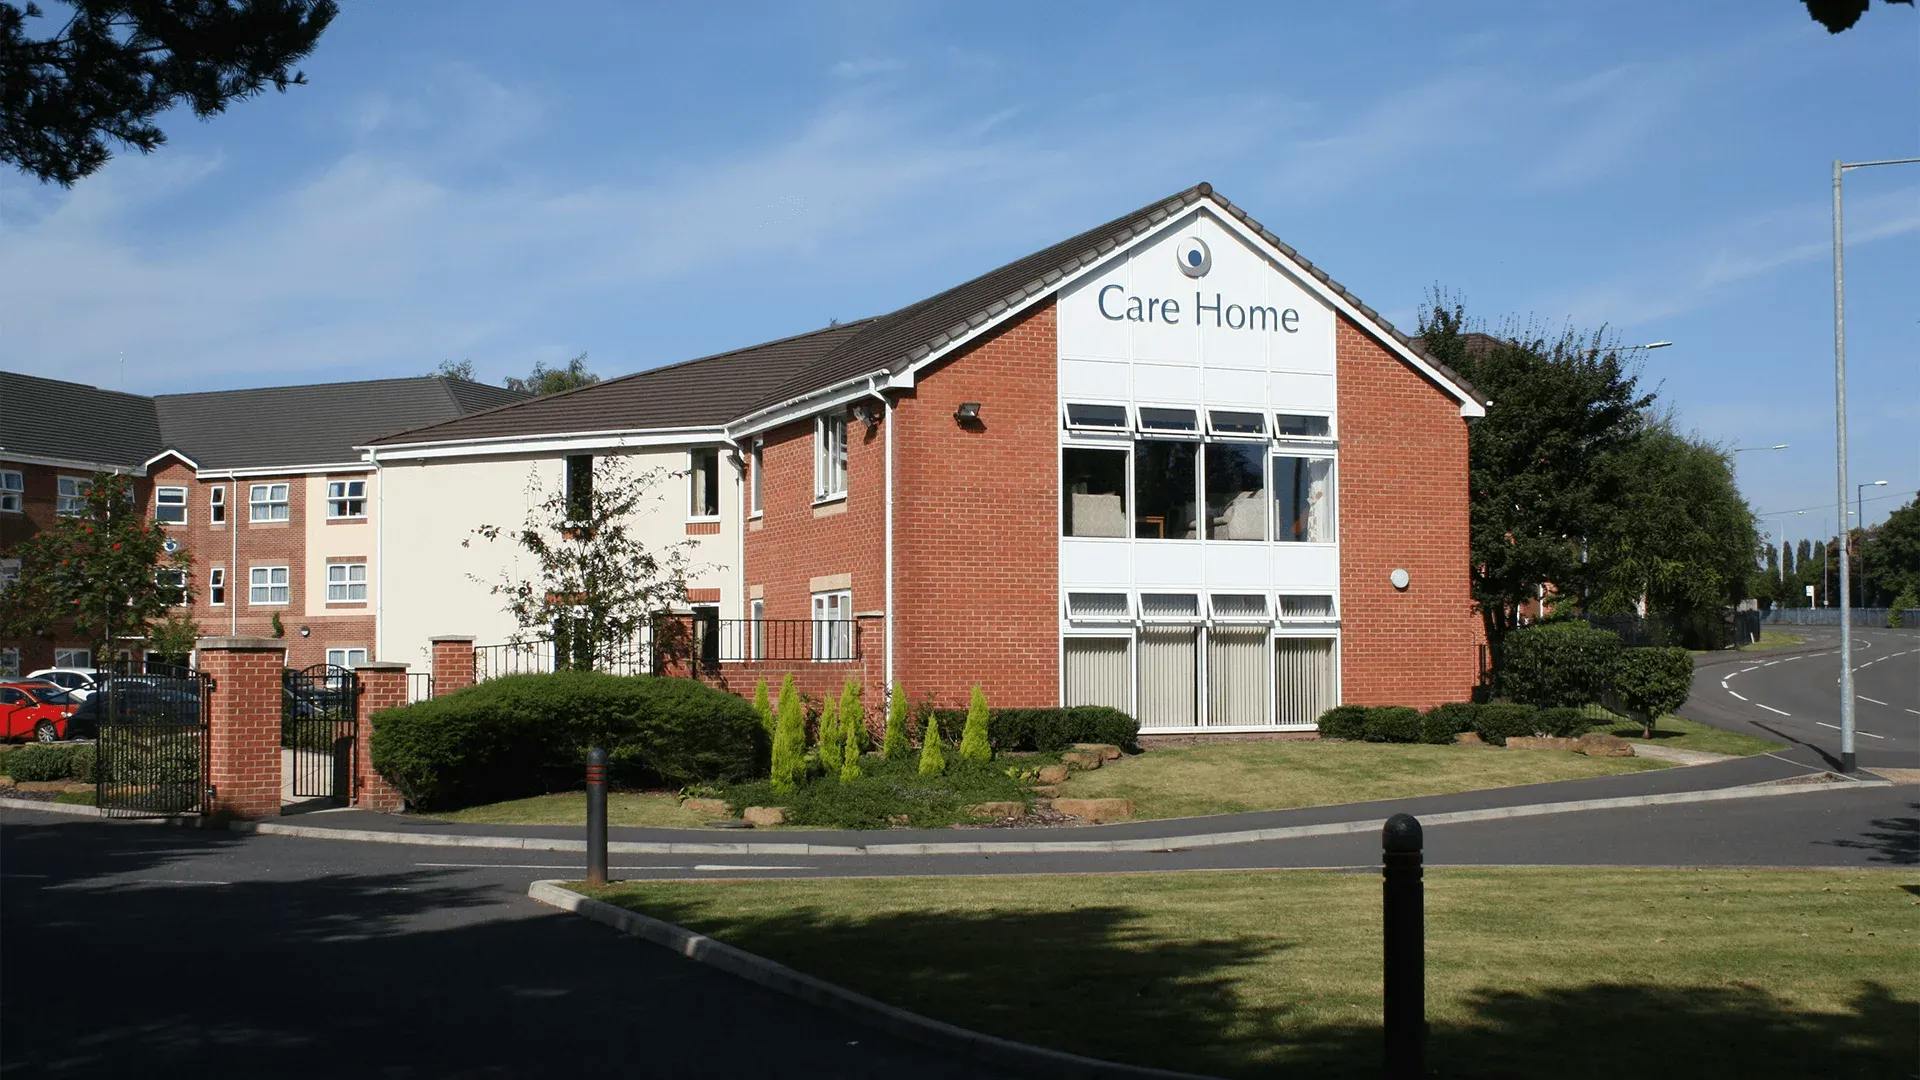 Acer Court  care home